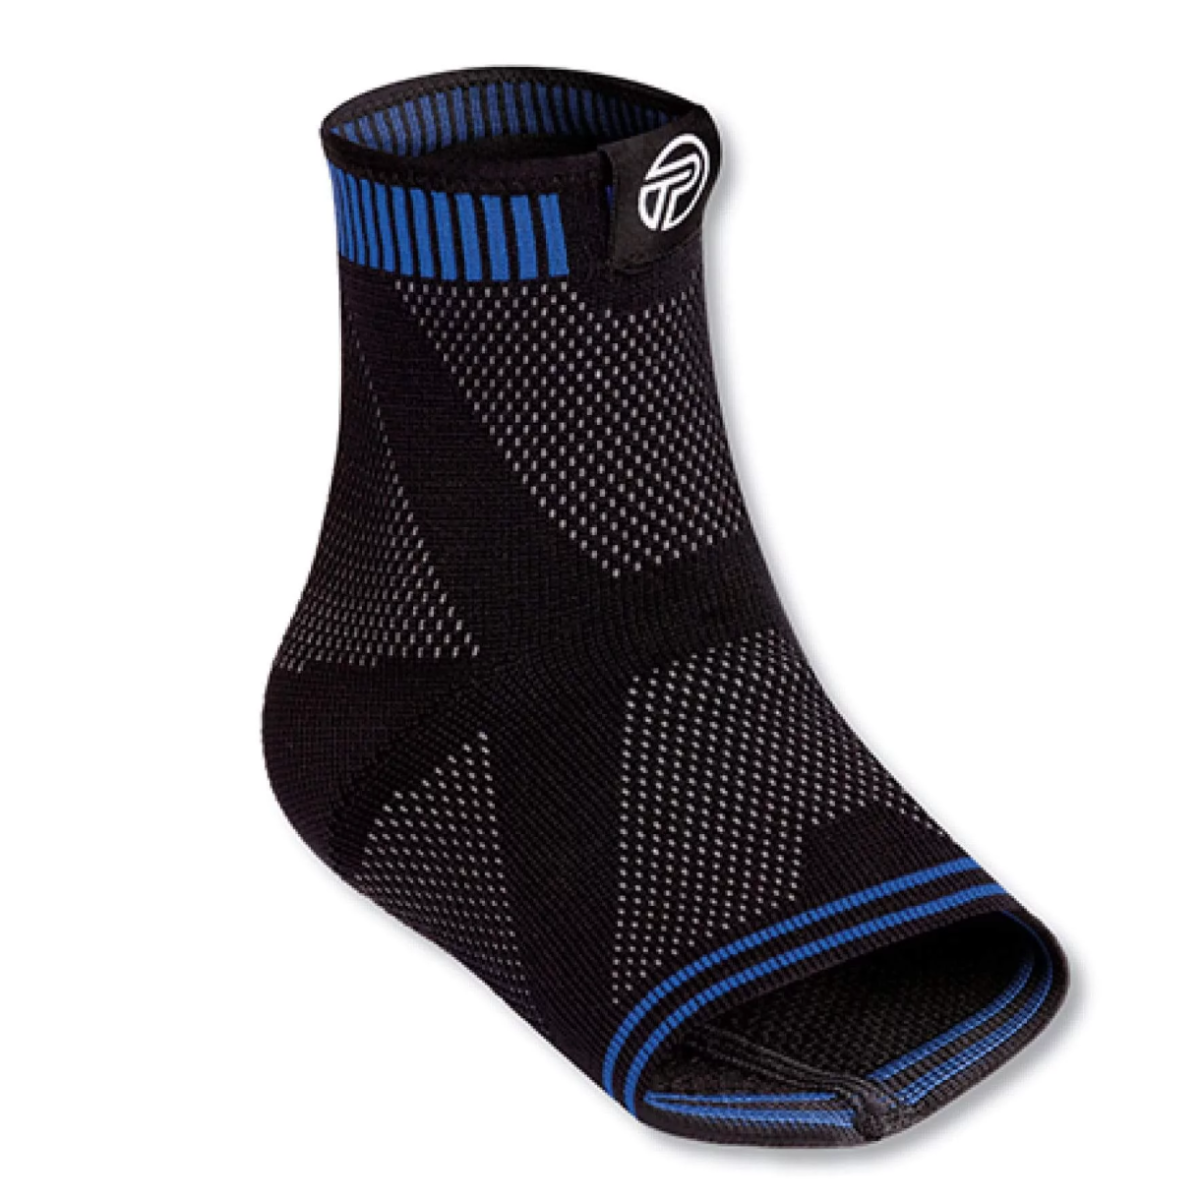 Pro-Tec 3D Ankle Support PROT-2400